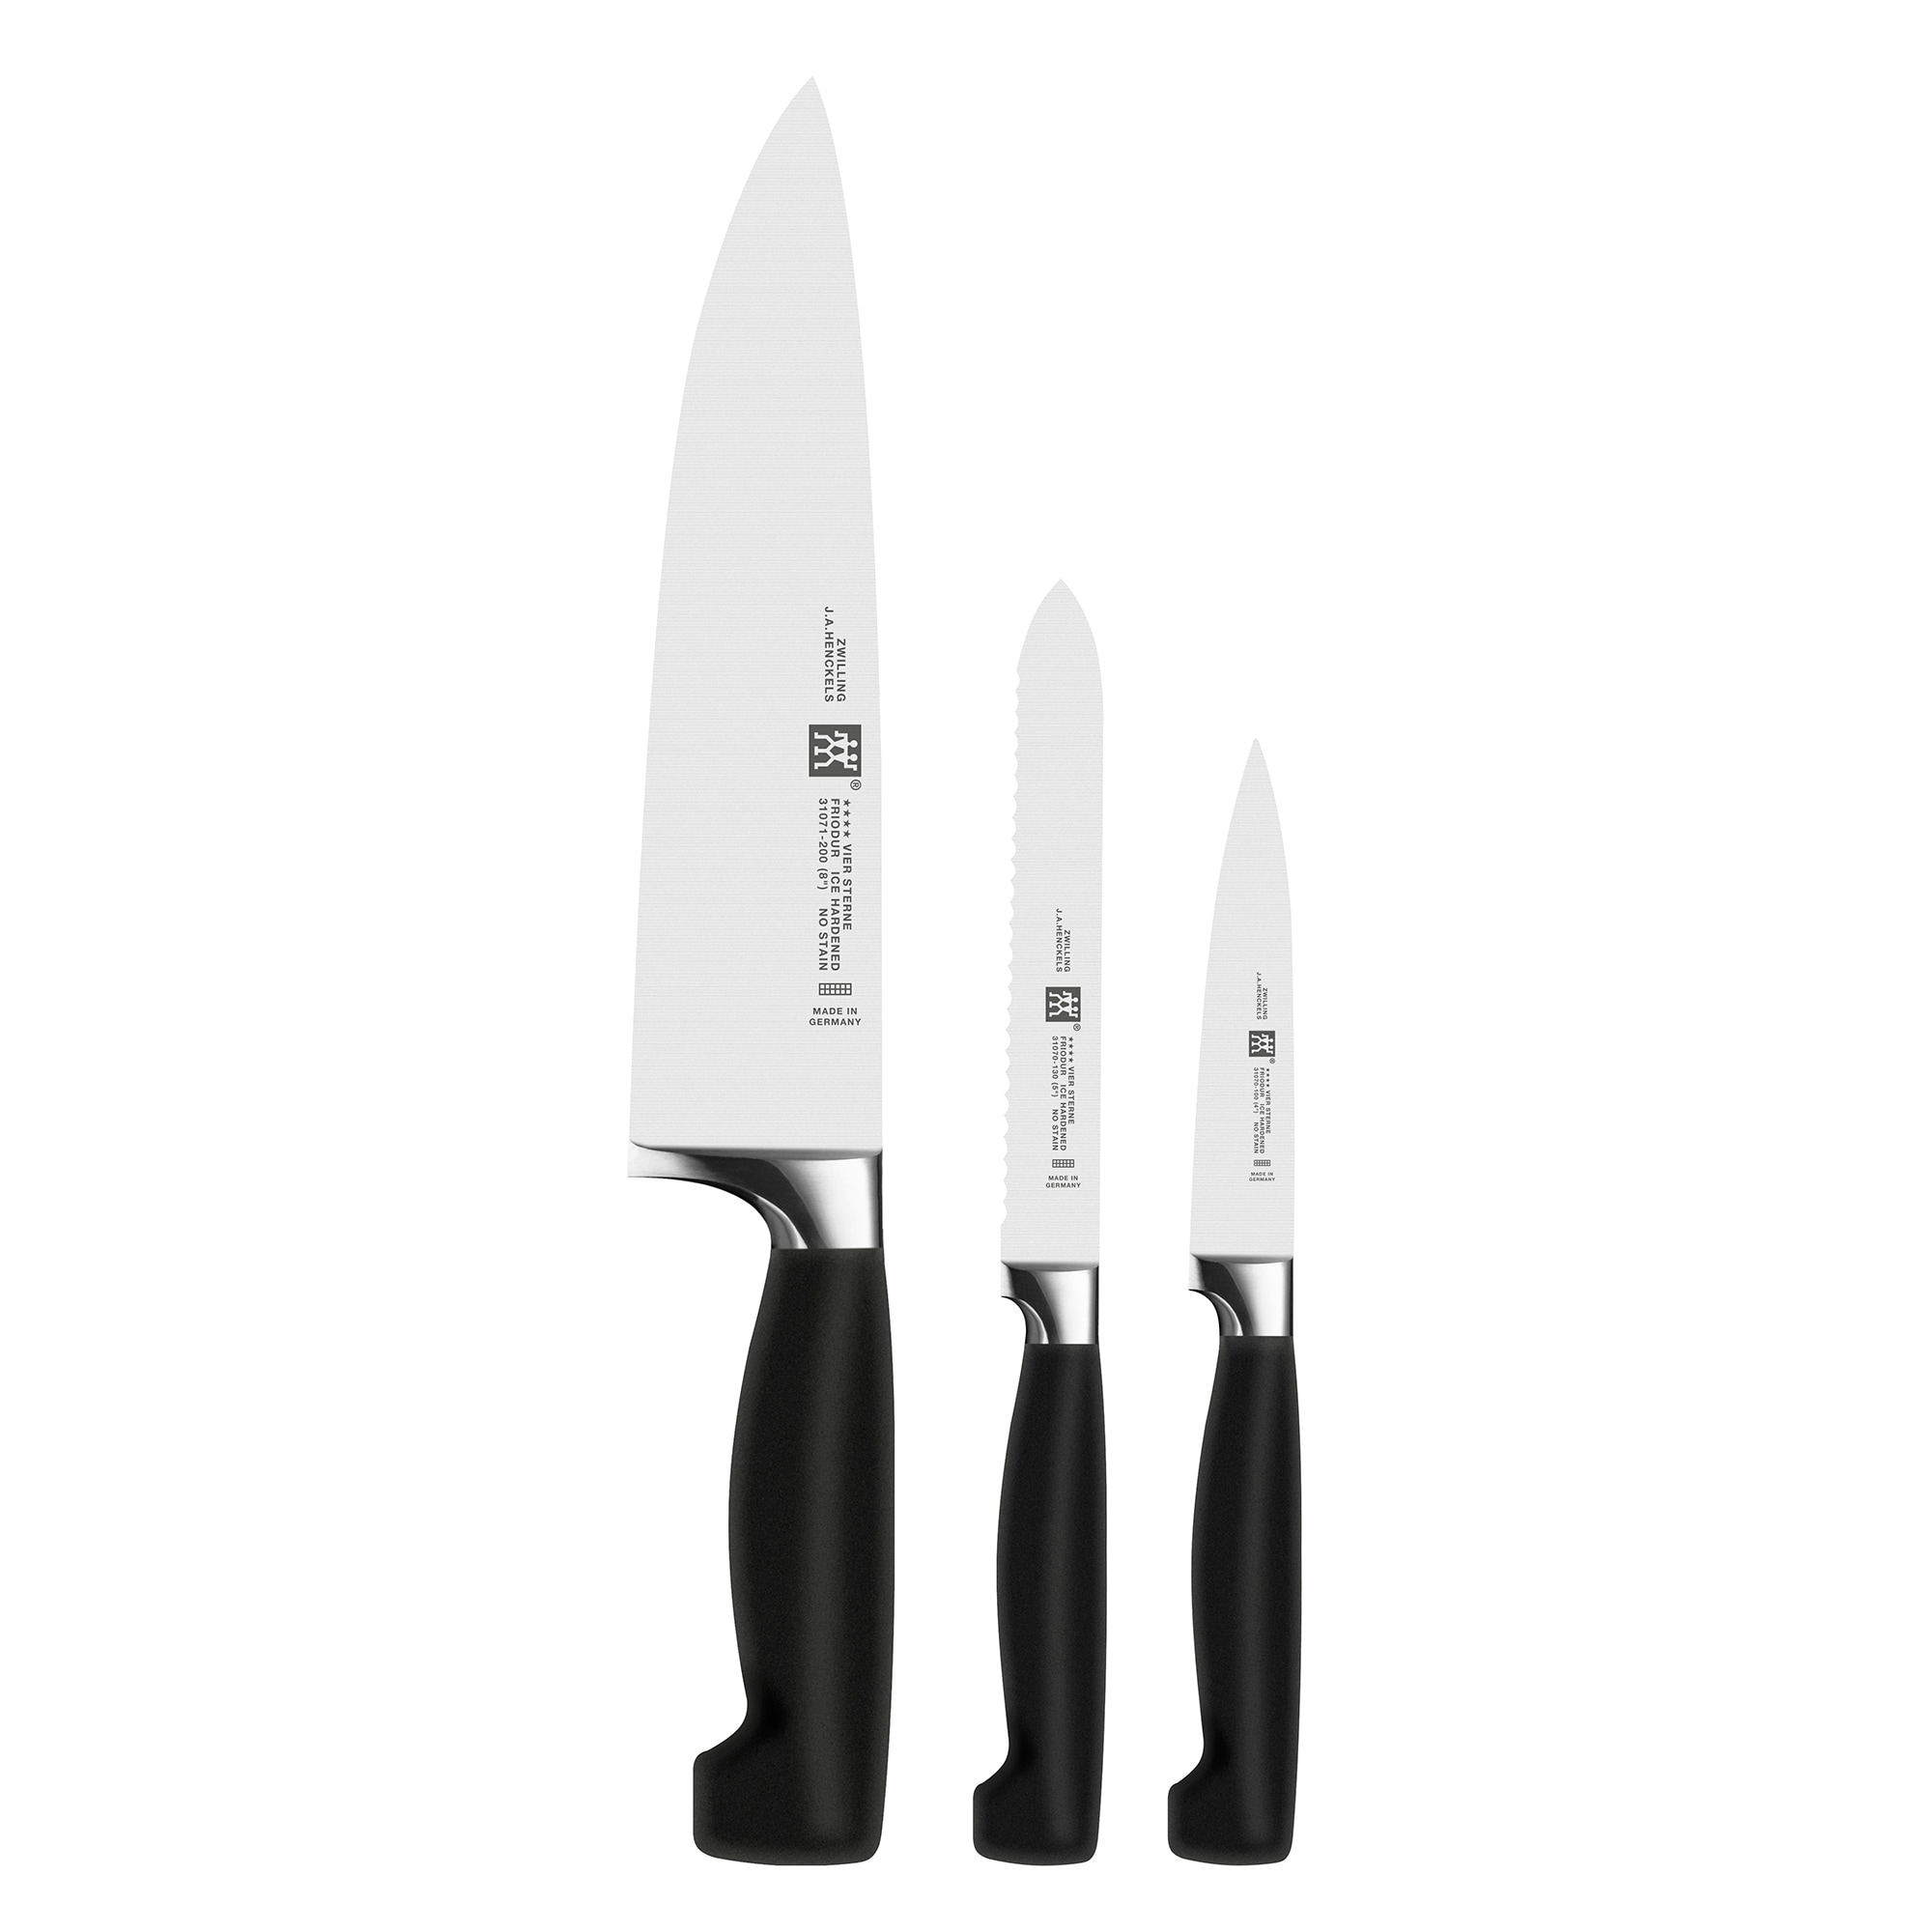 https://ak1.ostkcdn.com/images/products/is/images/direct/bc2de15d42803abe18175a7fb7fcdac84749a8fd/ZWILLING-J.A.-Henckels-Four-Star-3-pc-Essentials-Starter-Knife-Set.jpg